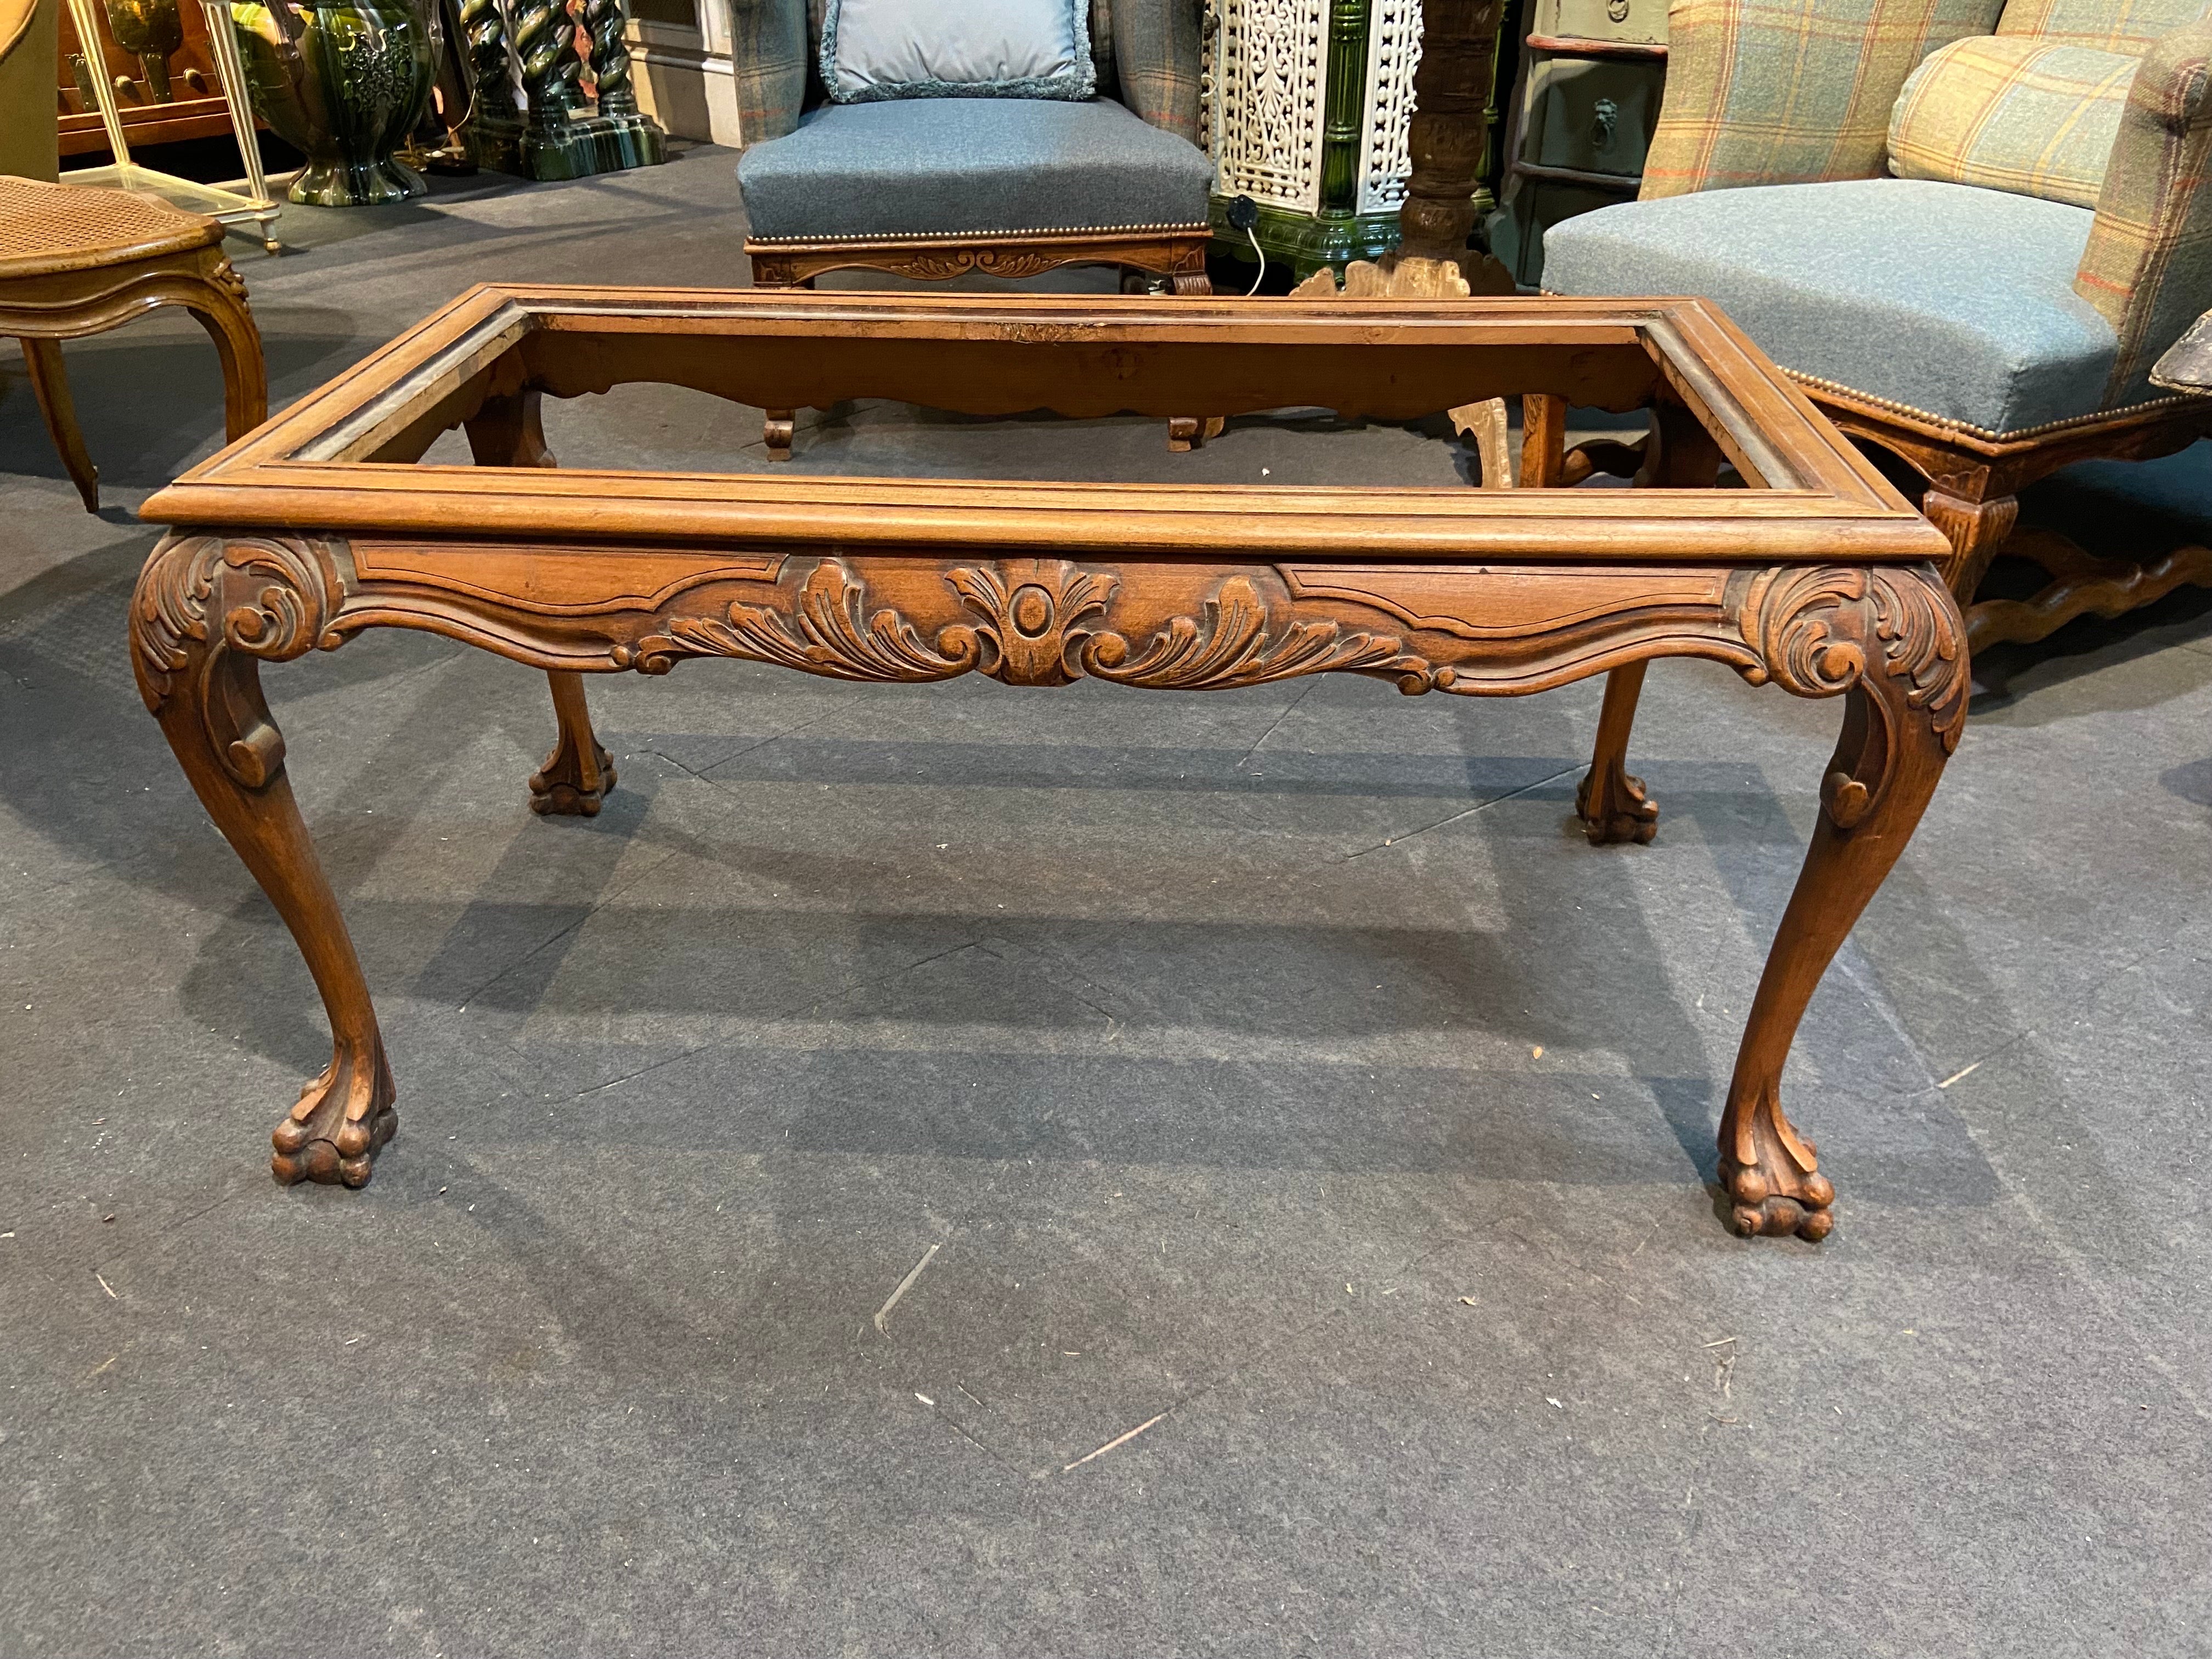 Here we present to you a 19th century French sofa table frame. This piece was made in hand carved walnut and is raised on four legs ending with lion's paws. It in very good condition with no restoration made so far. The original top is missing.